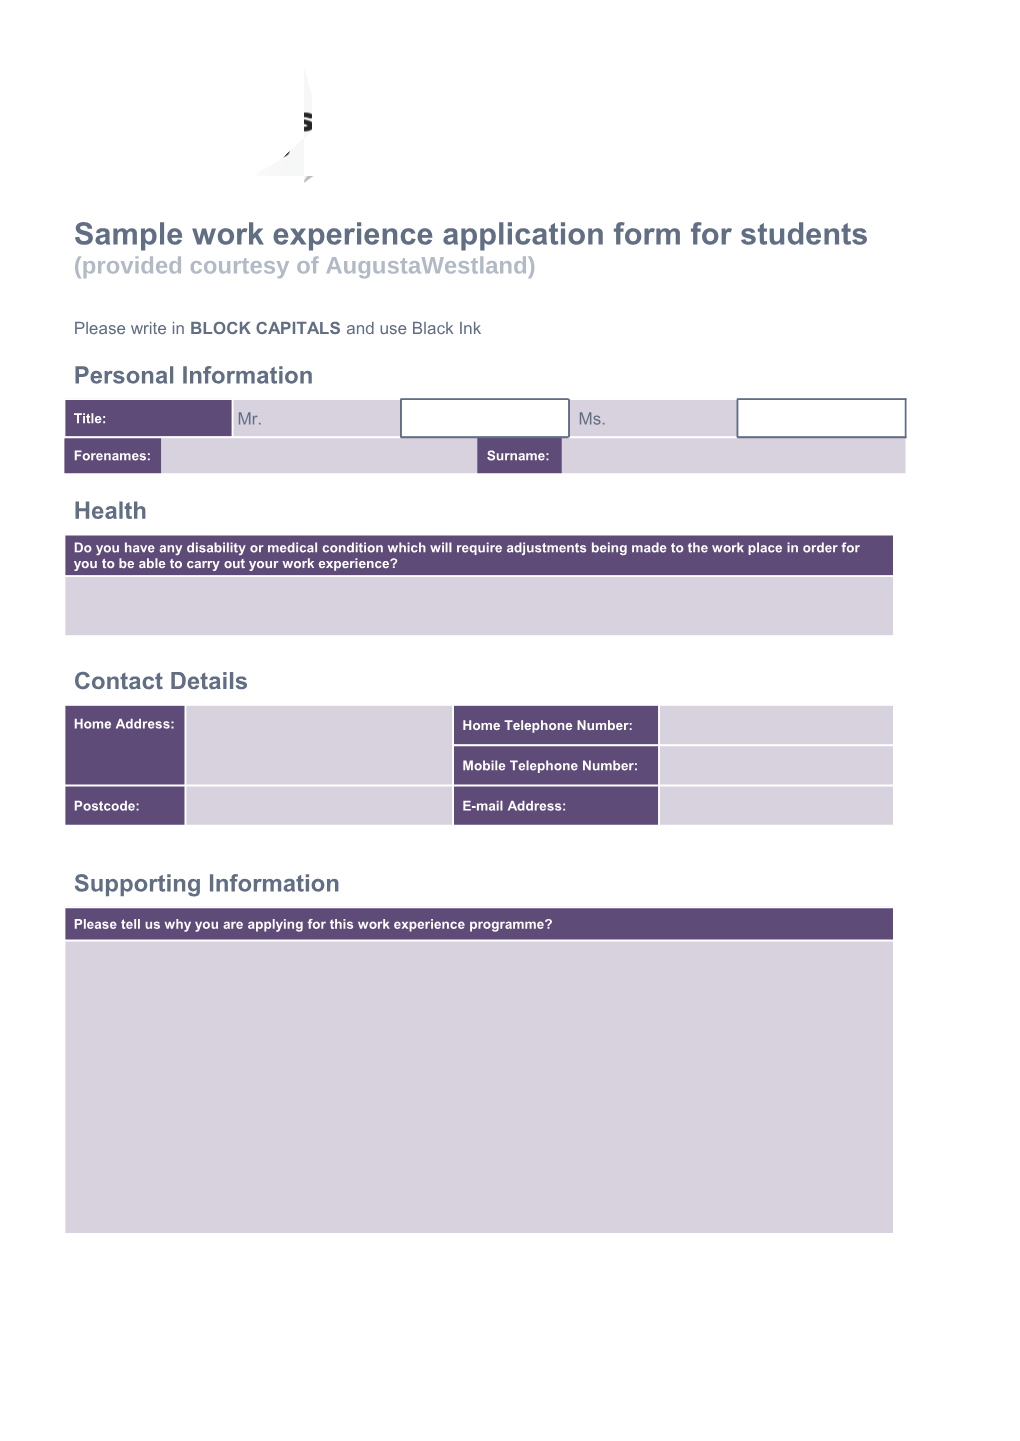 Sample Work Experience Application Form for Students